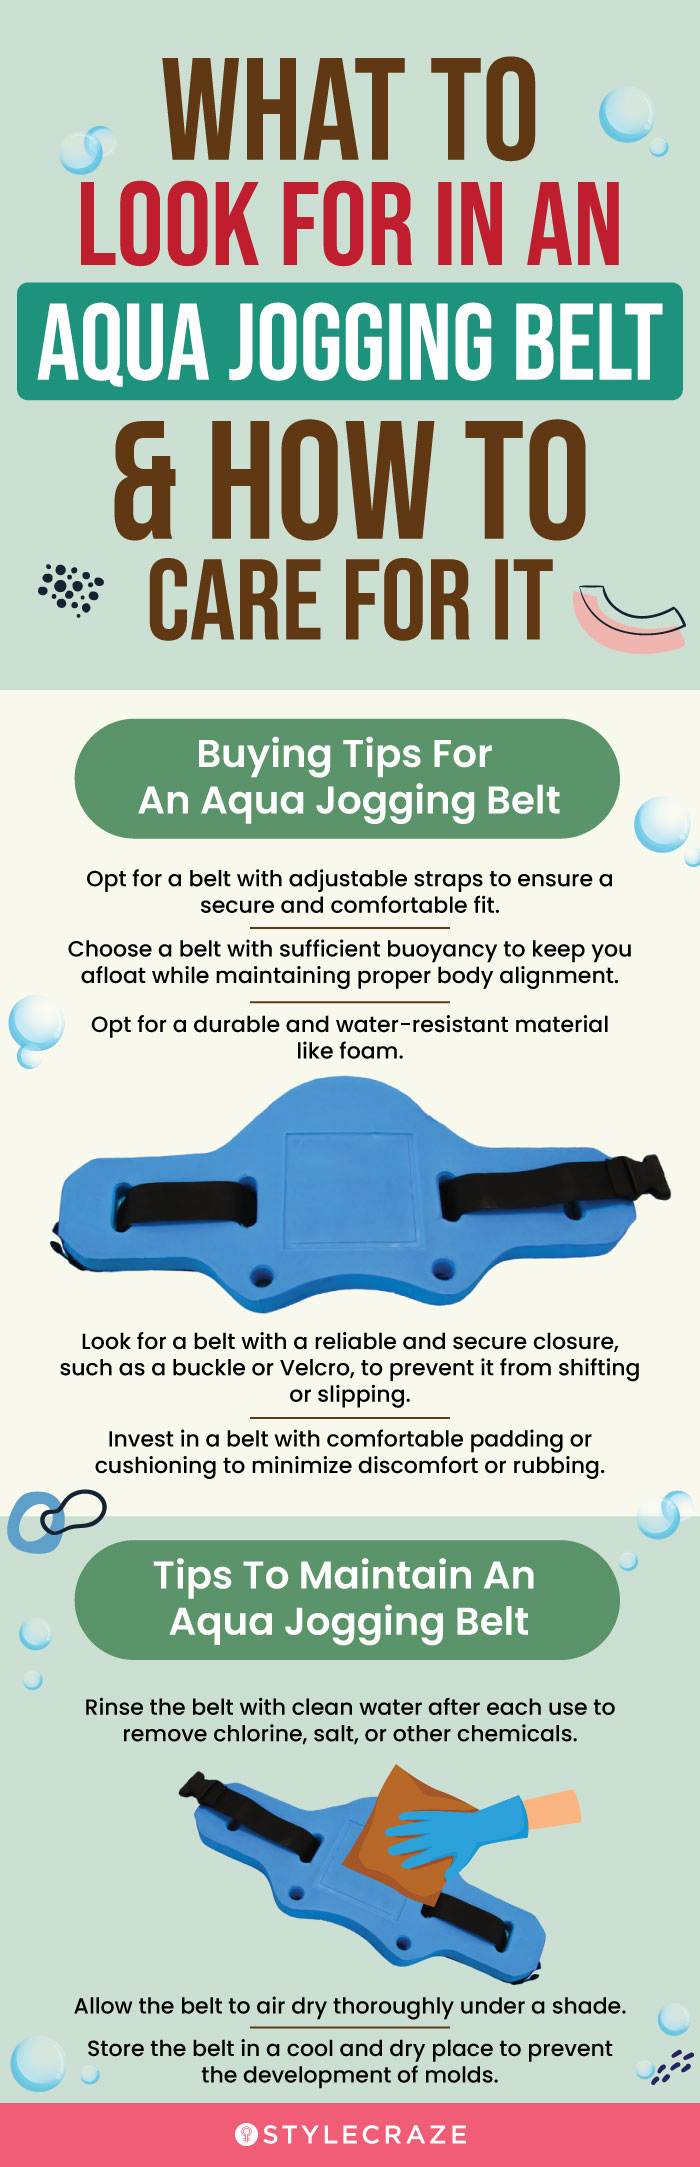 What To Look For In An Aqua Jogging Belt (infographic)